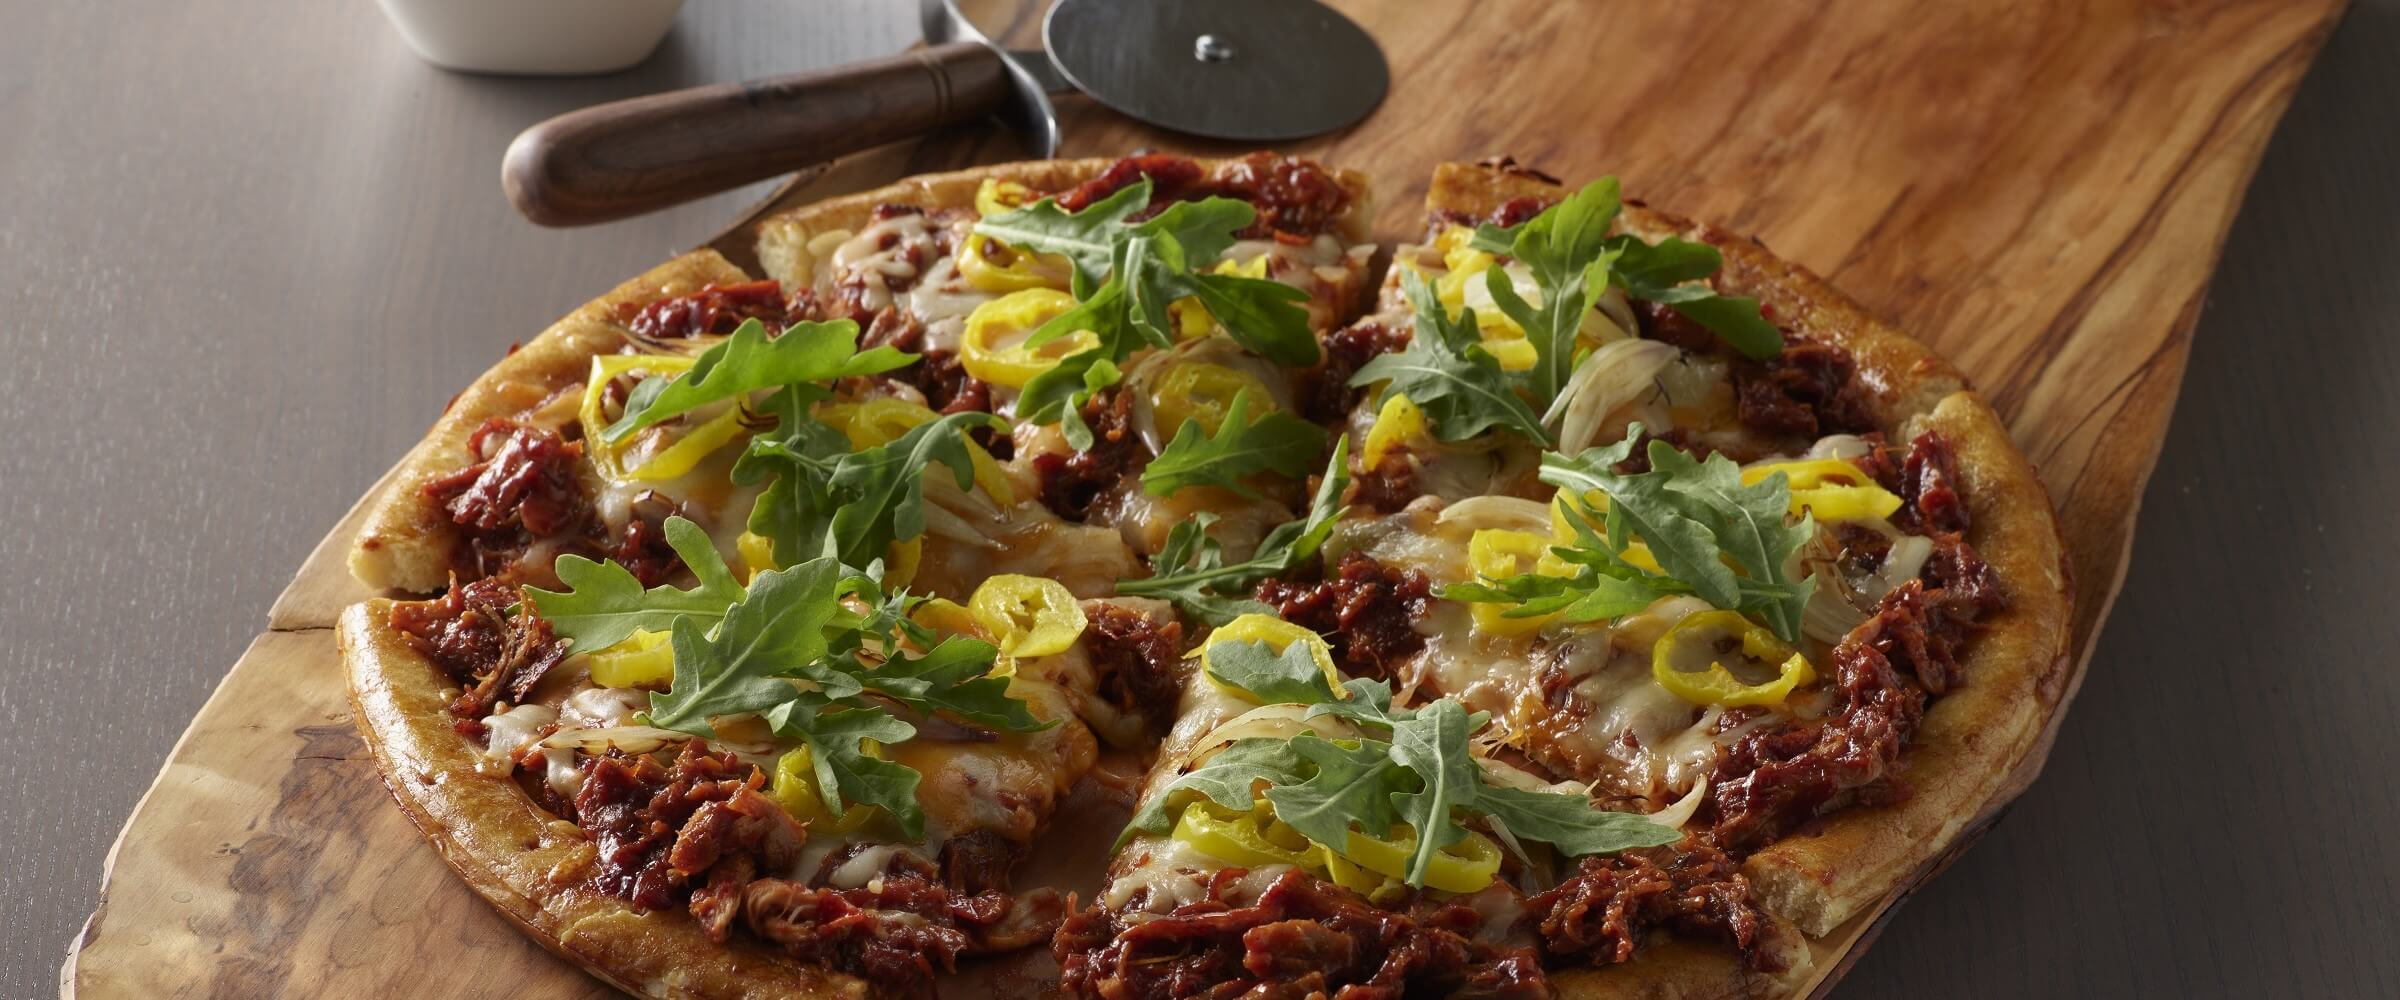 BBQ chicken pizza with arugula, shallot and banana peppers on wood cutting board with pizza cutter